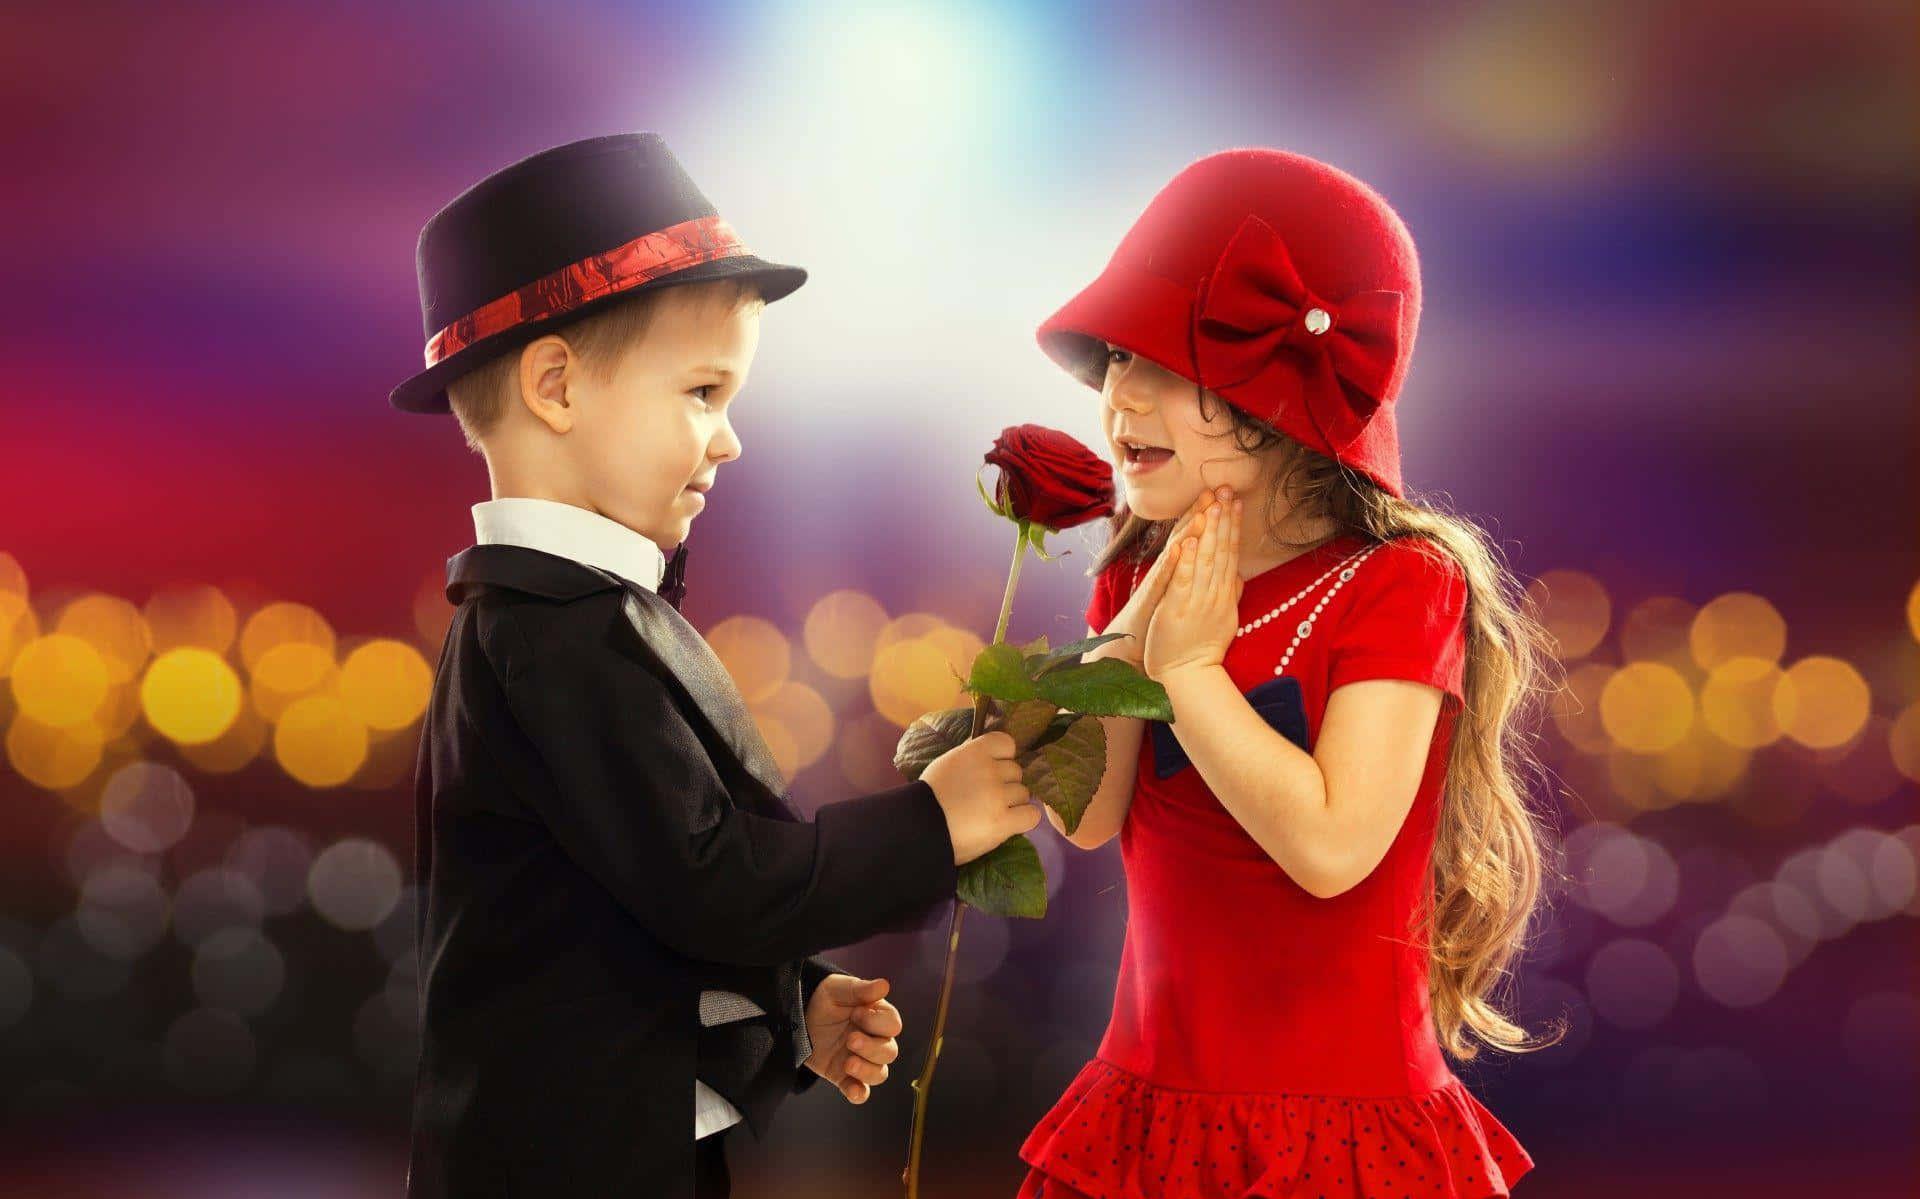 Cute Baby Couple Giving Red Rose Wallpaper